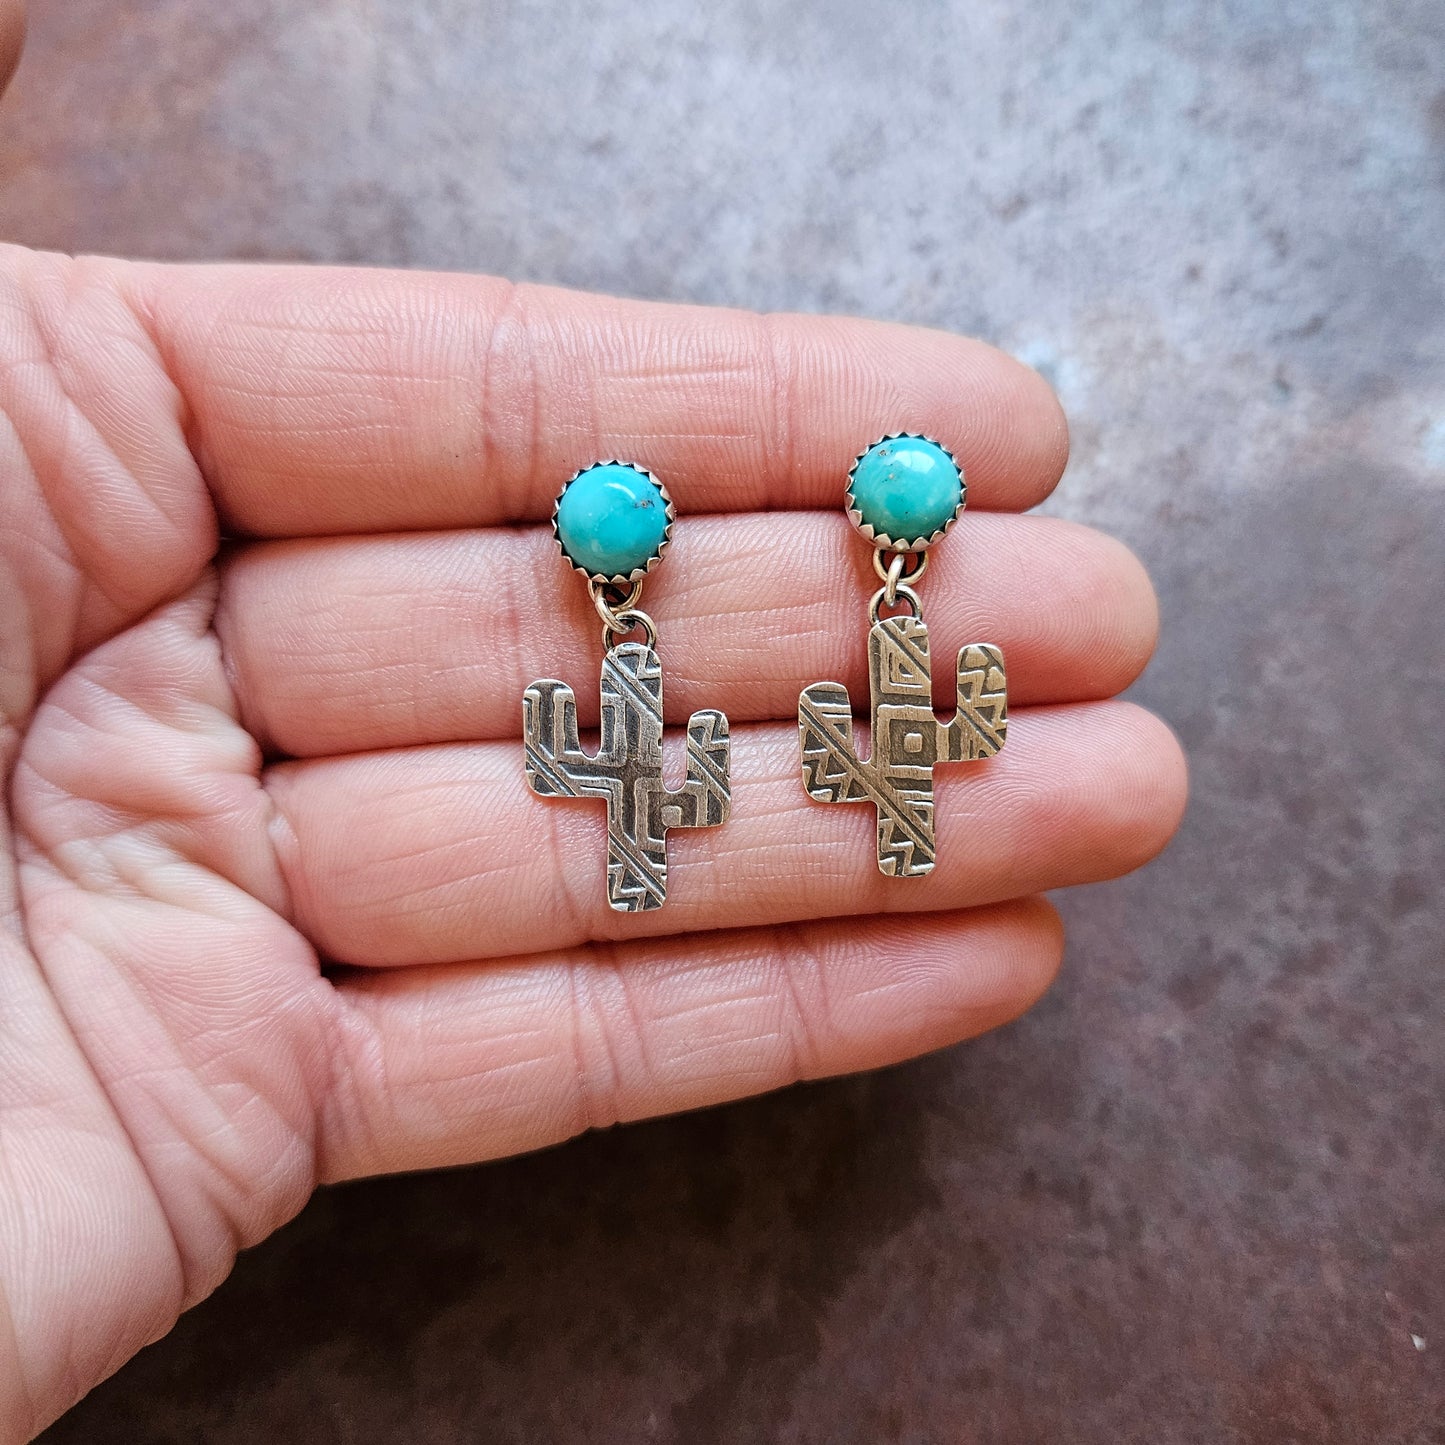 Cactus and Turquoise Earrings